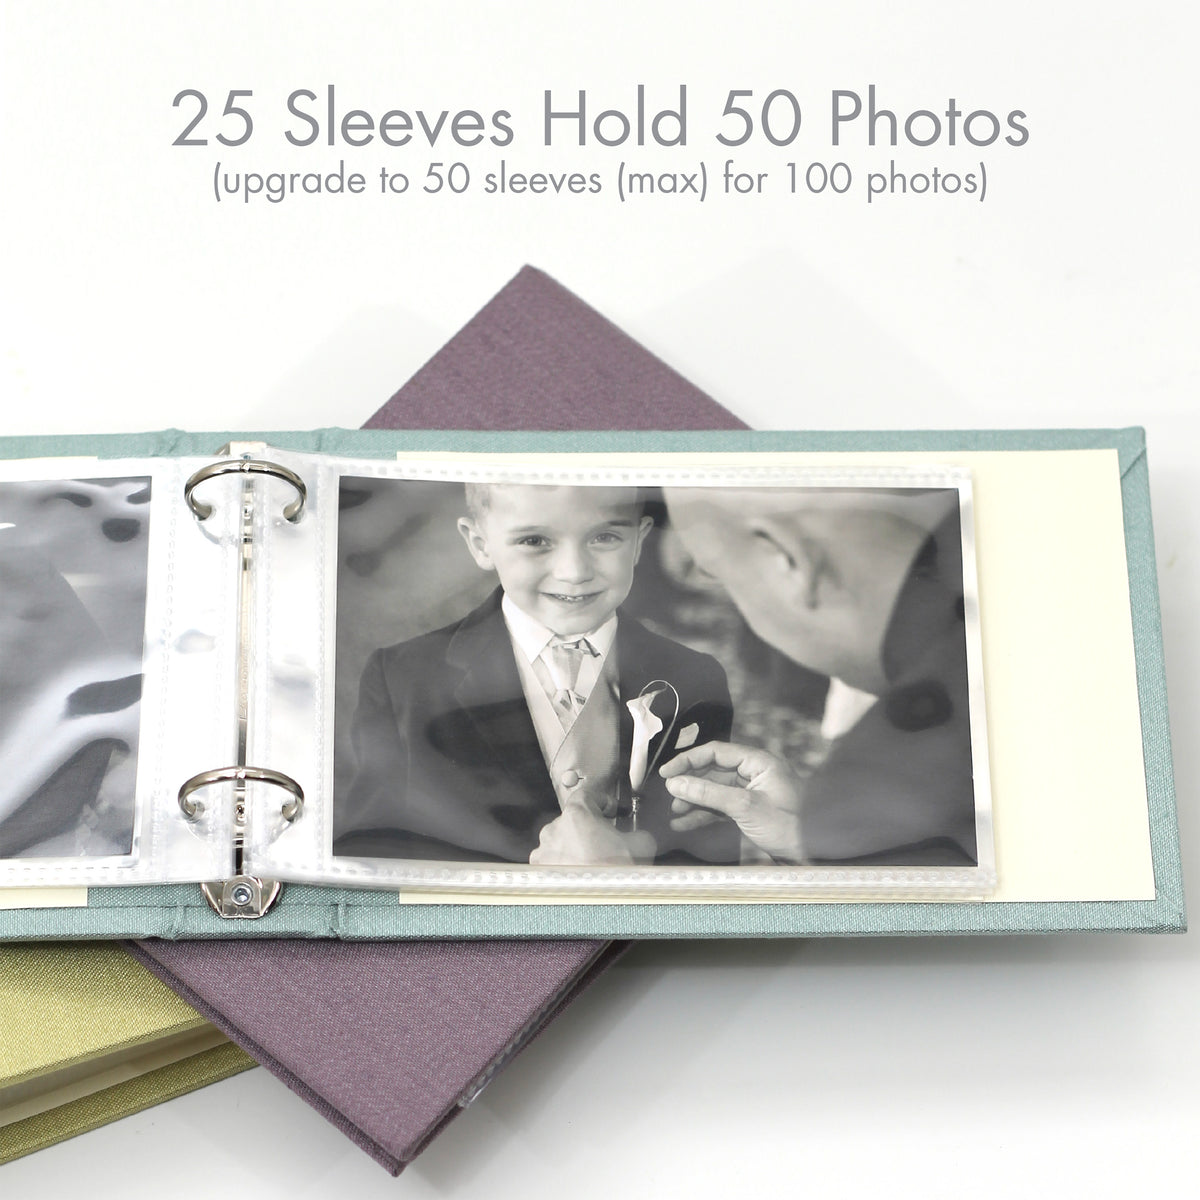 Small Photo Binder | for 4x6 Photos | with Emerald Silk